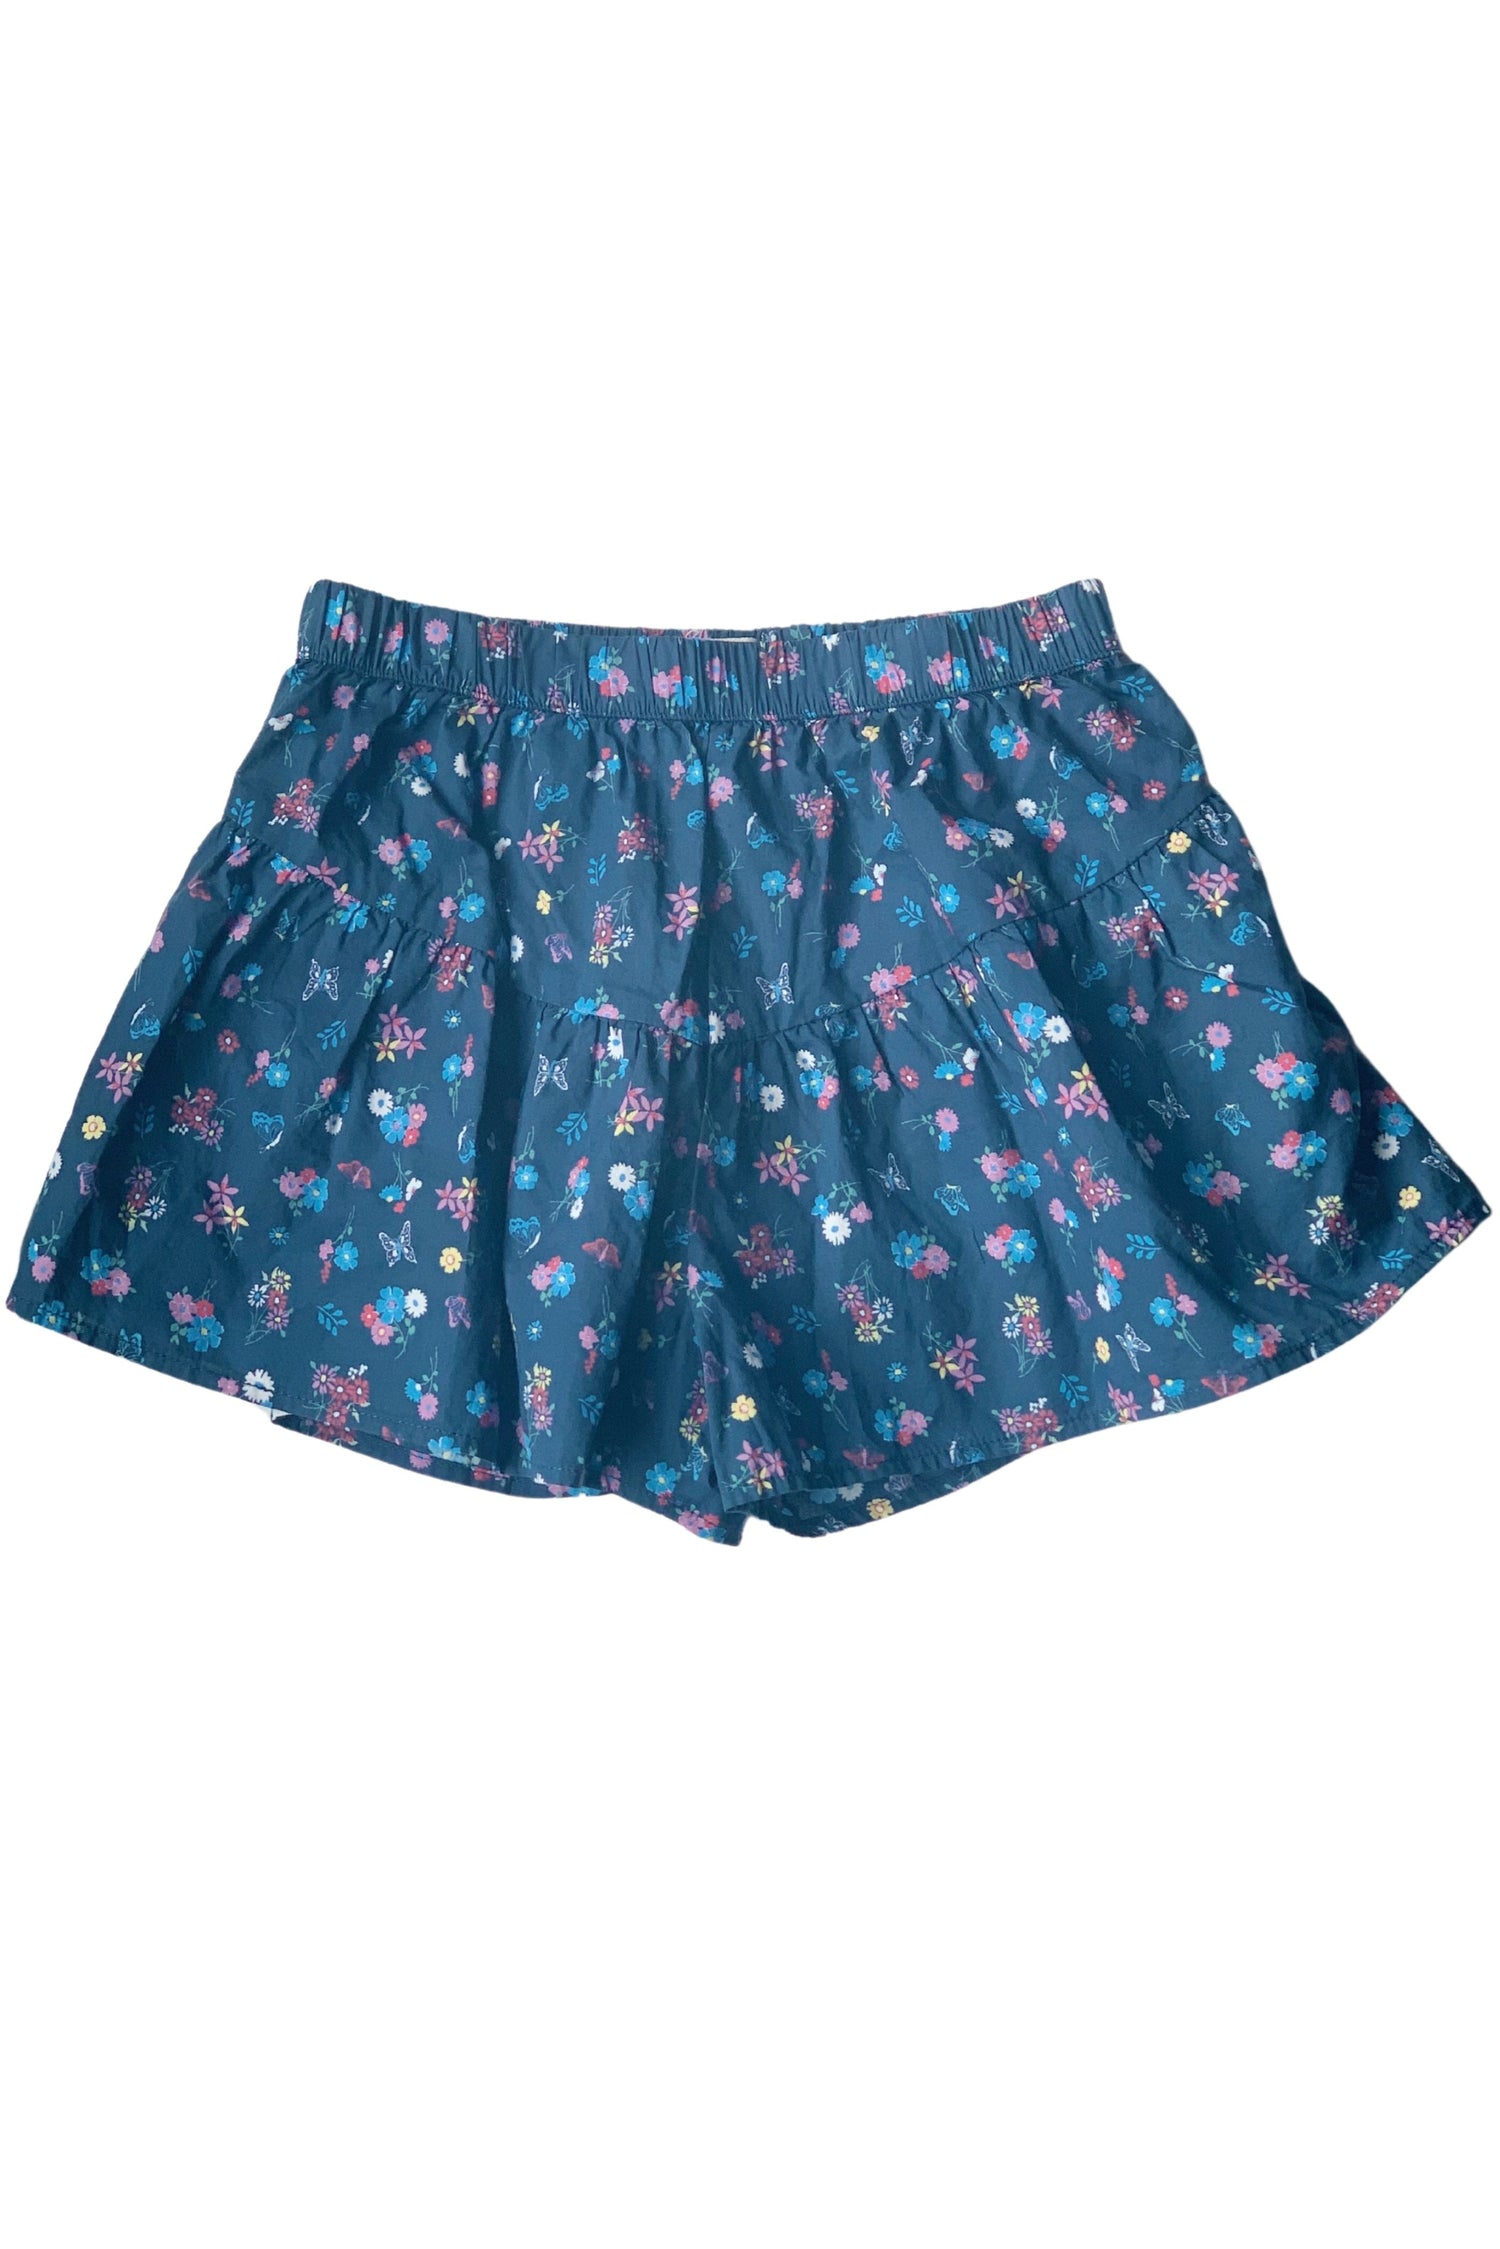 Blue elastic waist shorts with all over butterfly and flower pattern. 